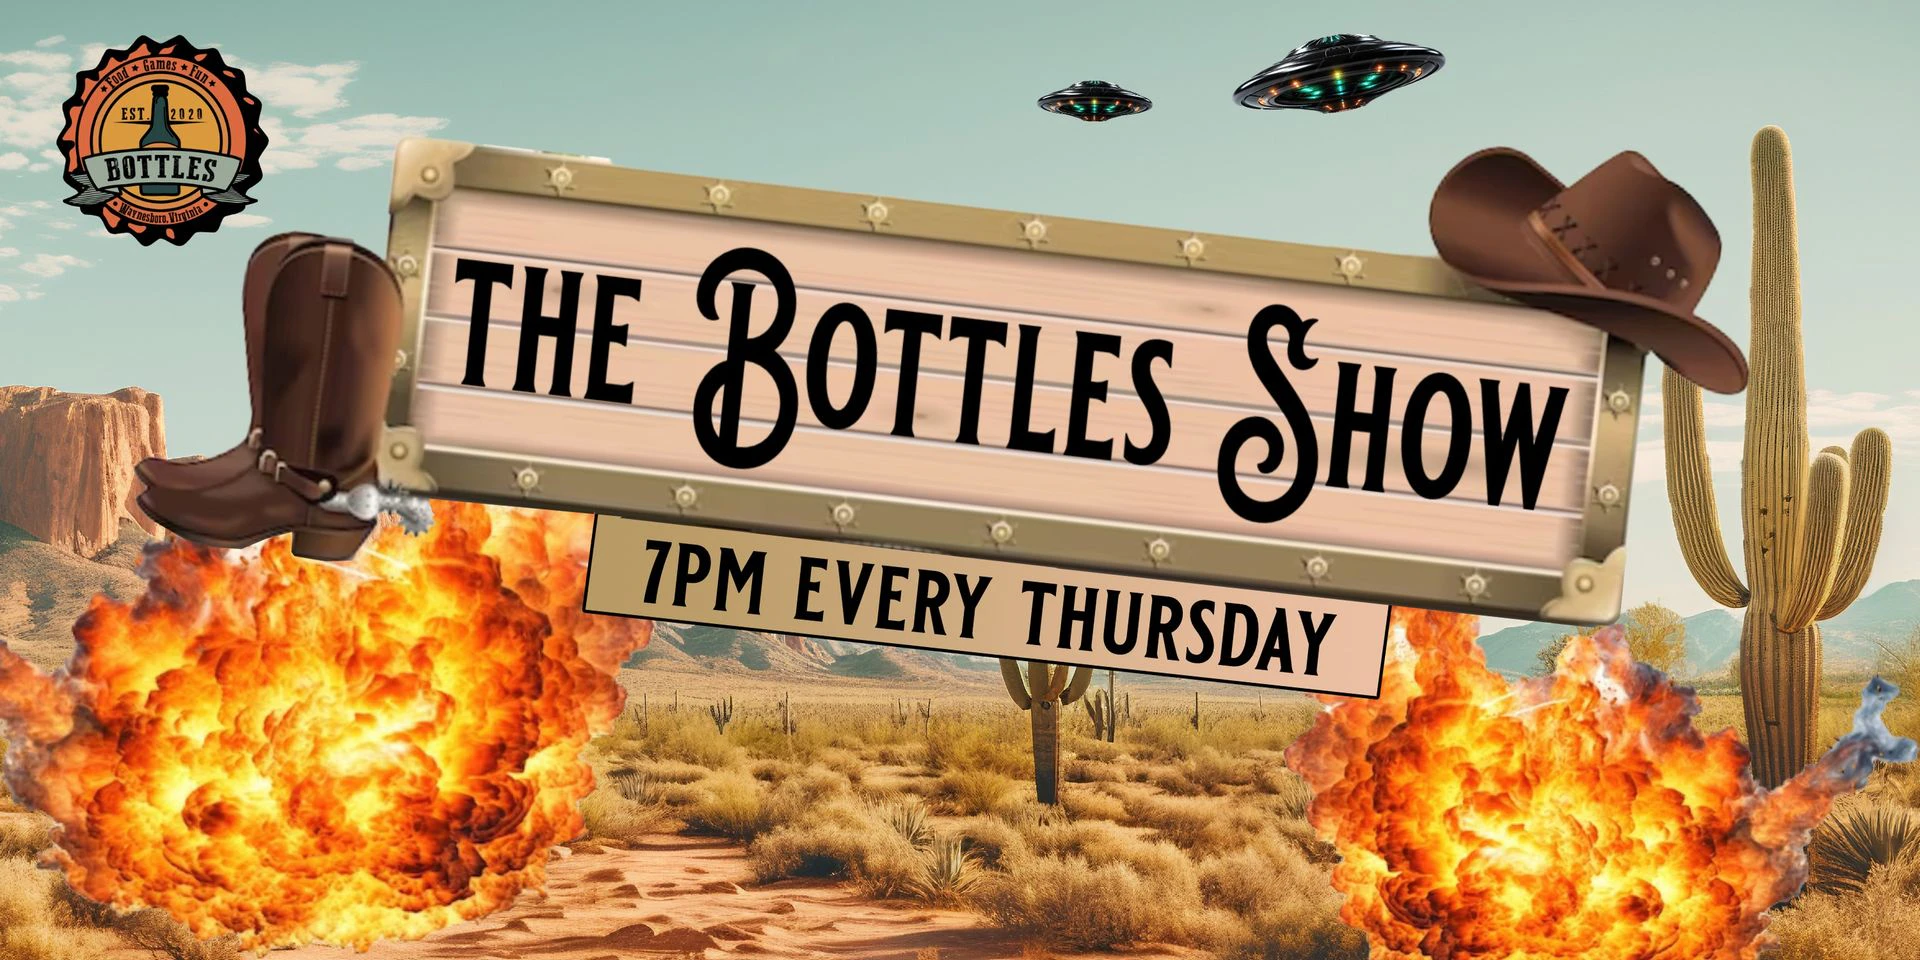 The Bottles Show! - Calendar Of Events